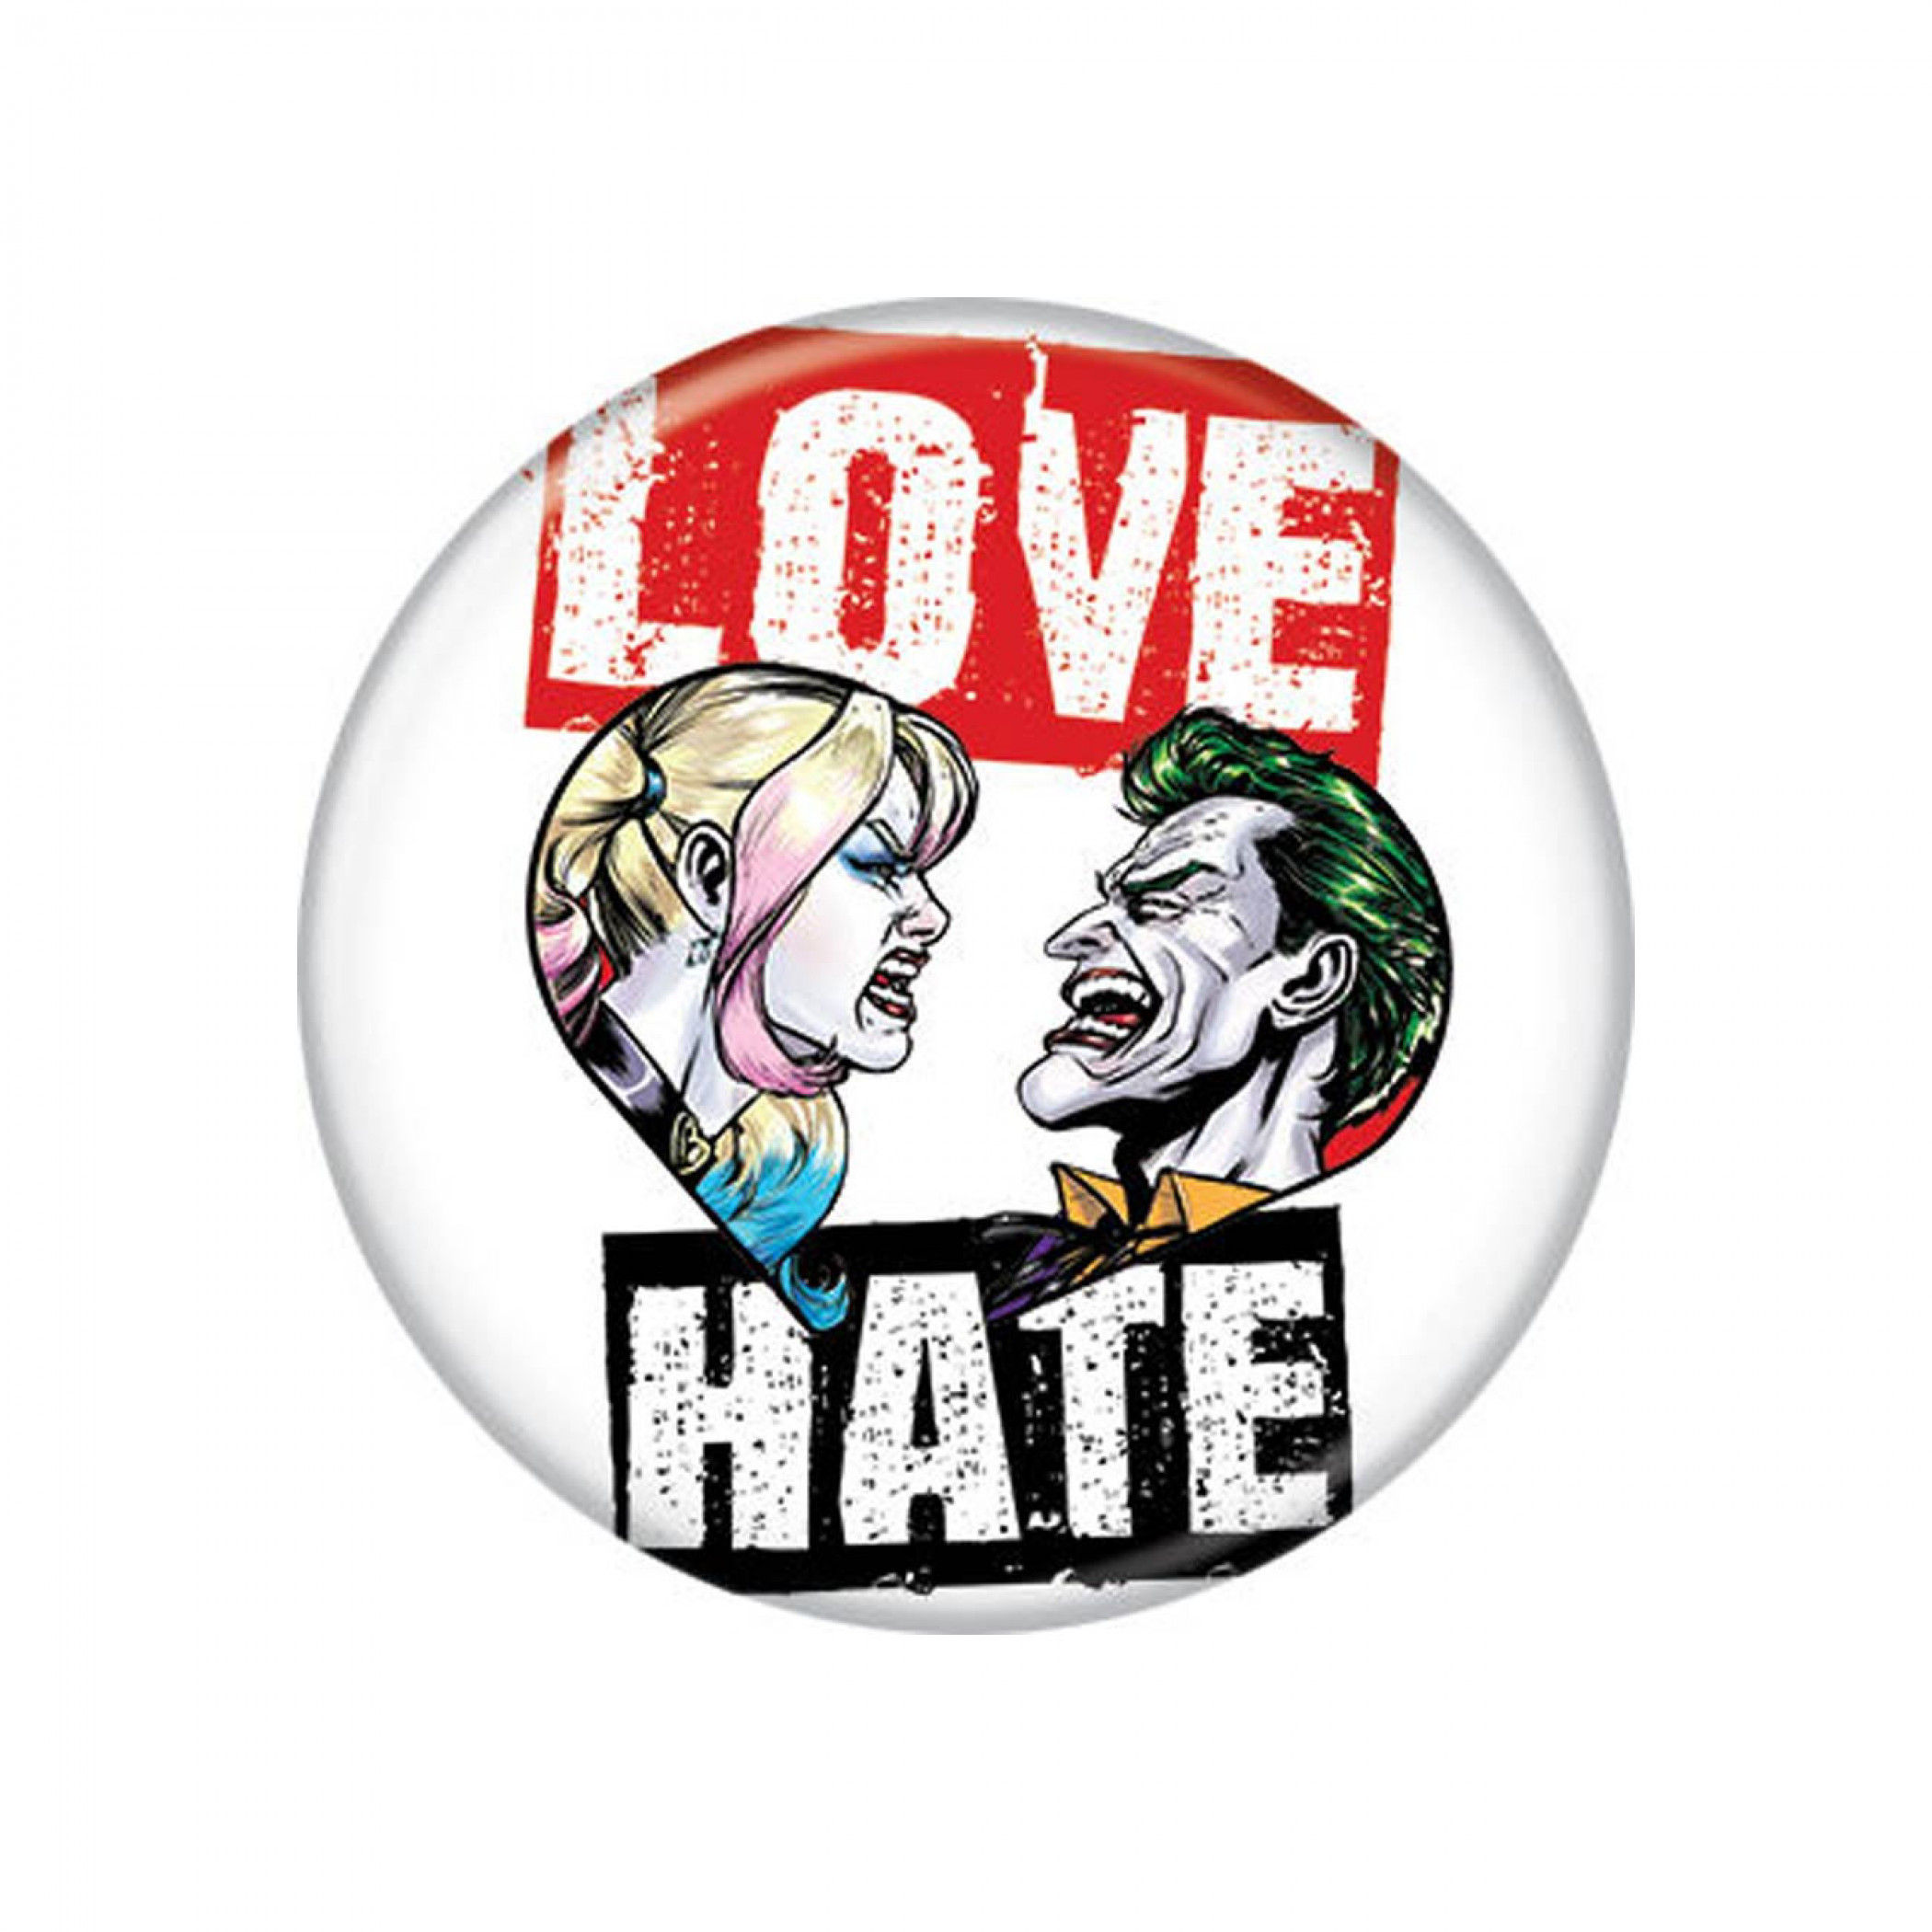 Harley Quinn and Joker Love and Hate 1.25 inch Button